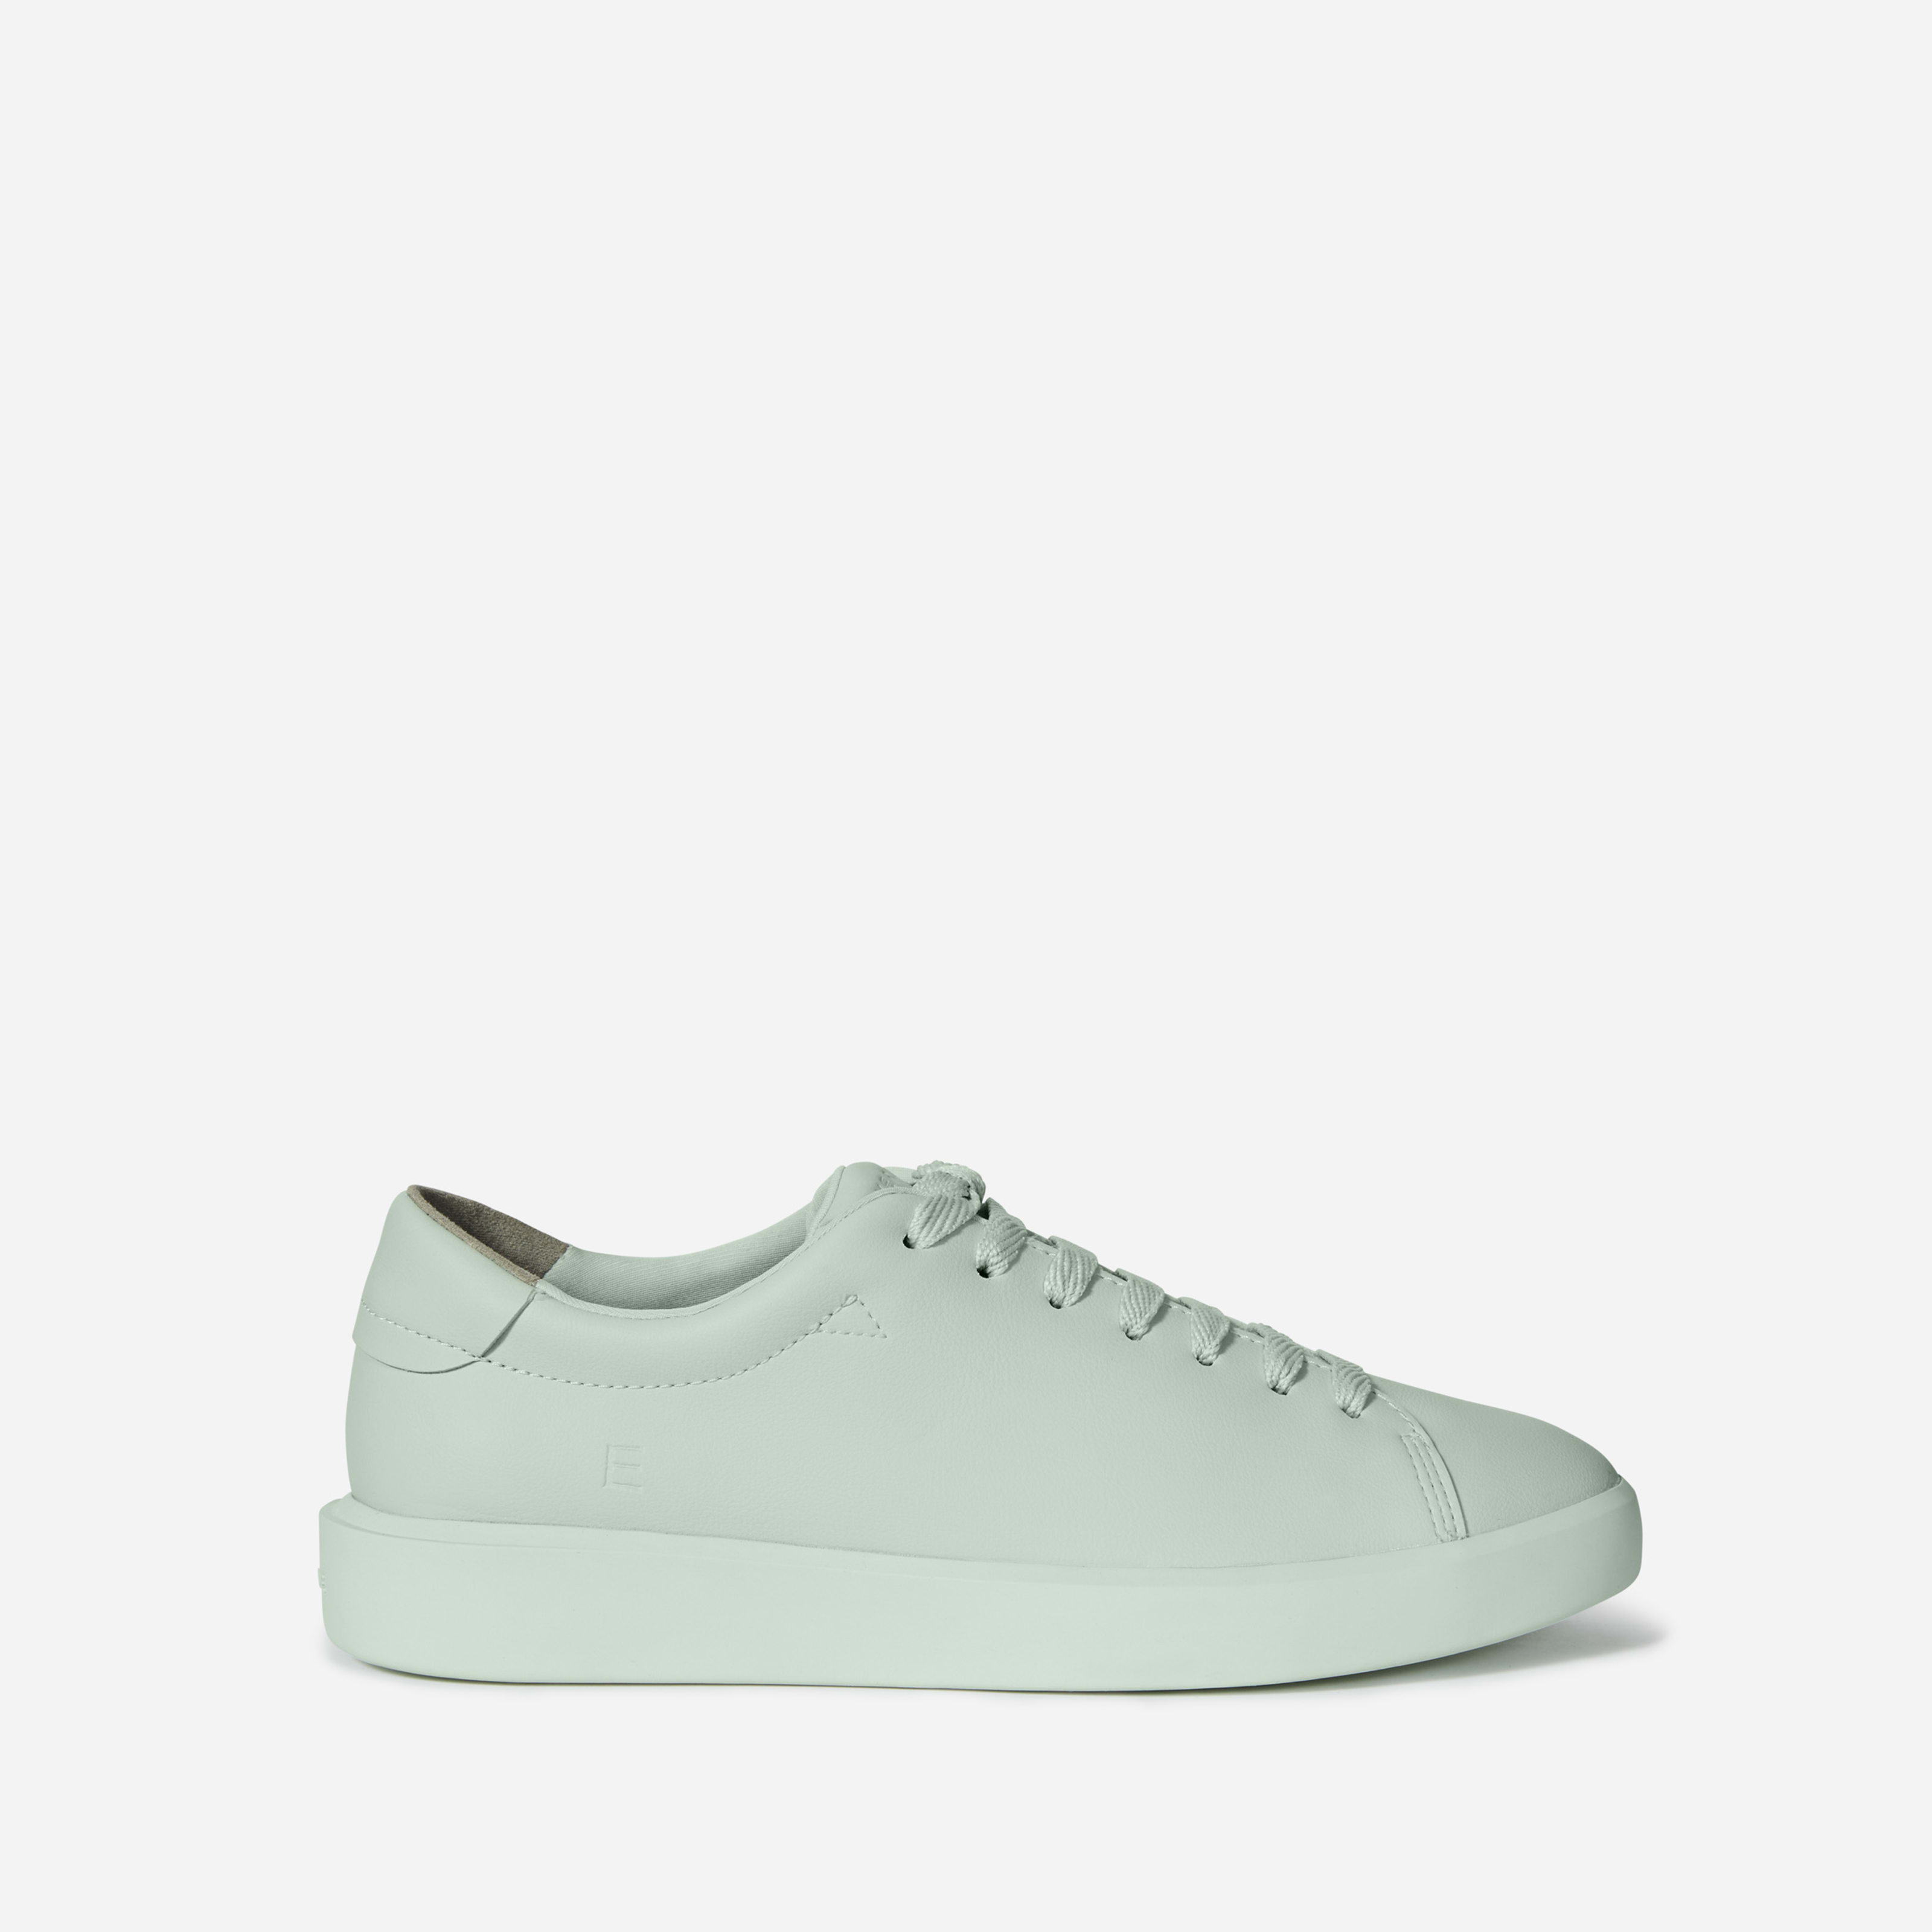 men's releatherâ® tennis shoe by everlane in lily green, size w13m11